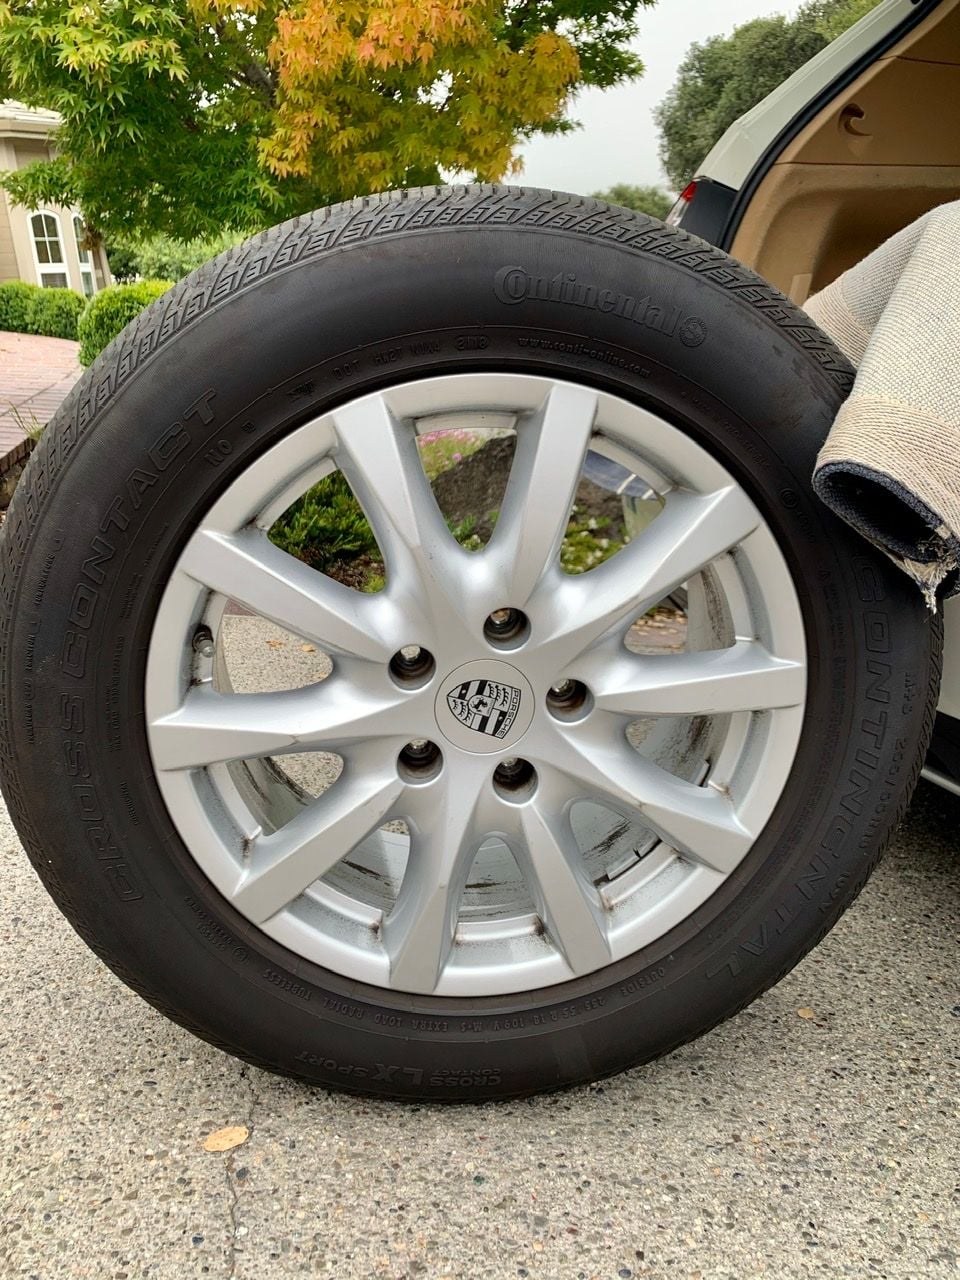 Wheels and Tires/Axles - porsche OEM (BBS) 18" Wheels and 255/55 R18 CrossContact LX Sport Tires - with TPMS - Used - 2011 to 2019 Porsche Cayenne - Palo Alto, CA 94306, United States